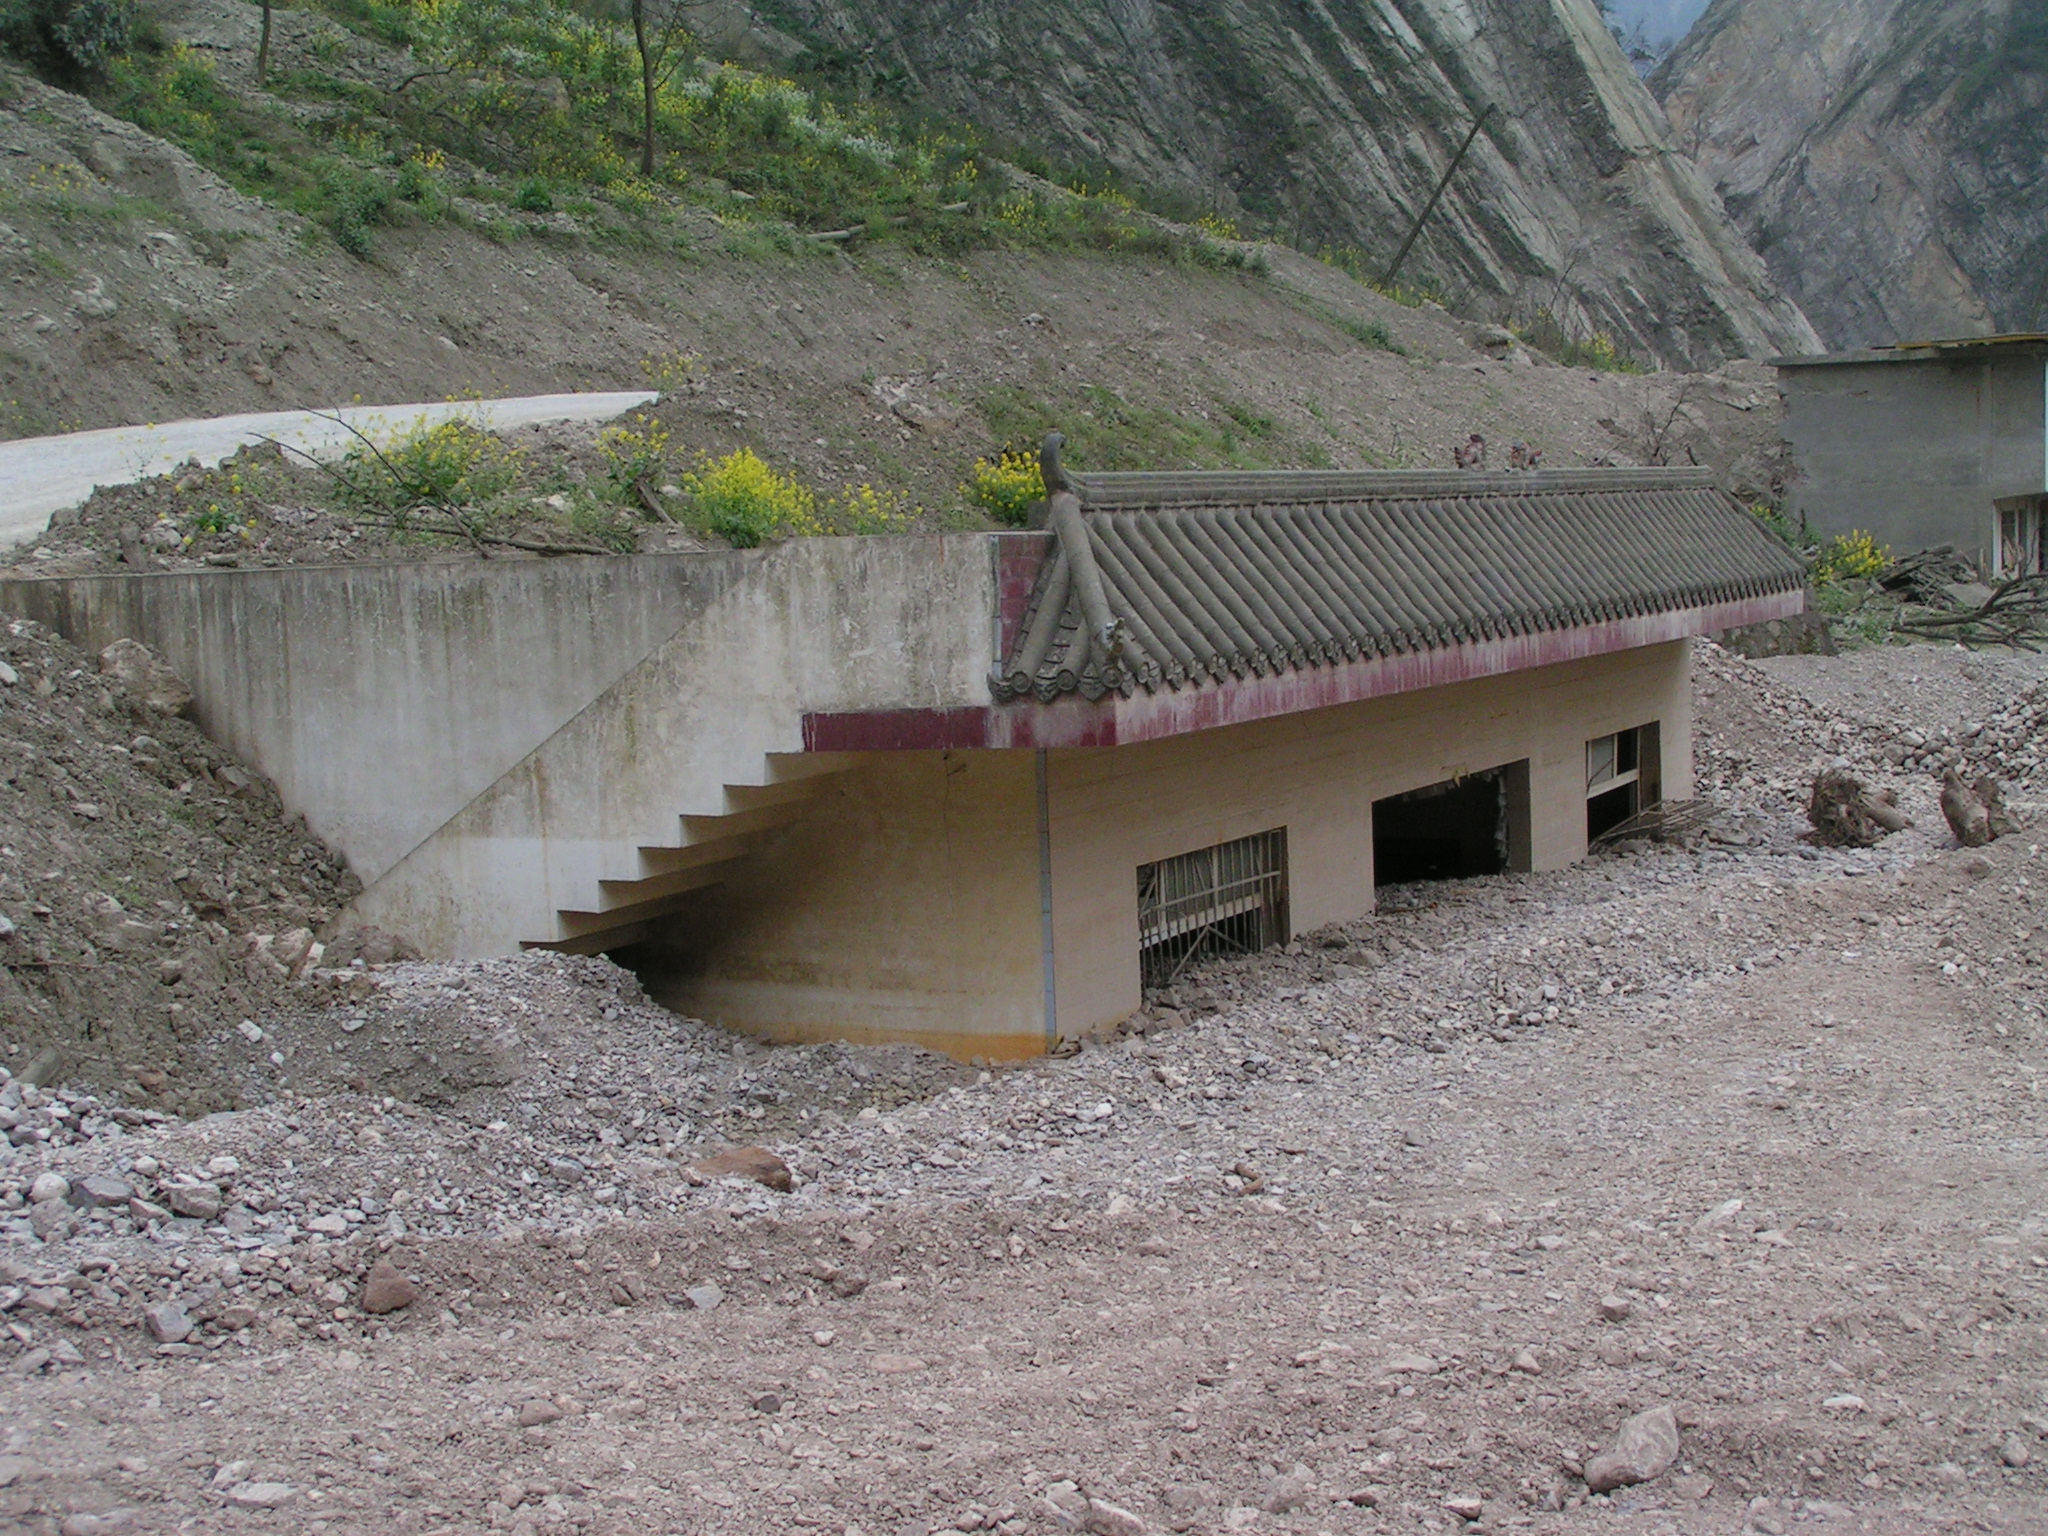 Simple actions to survive a landslide: an inundated house